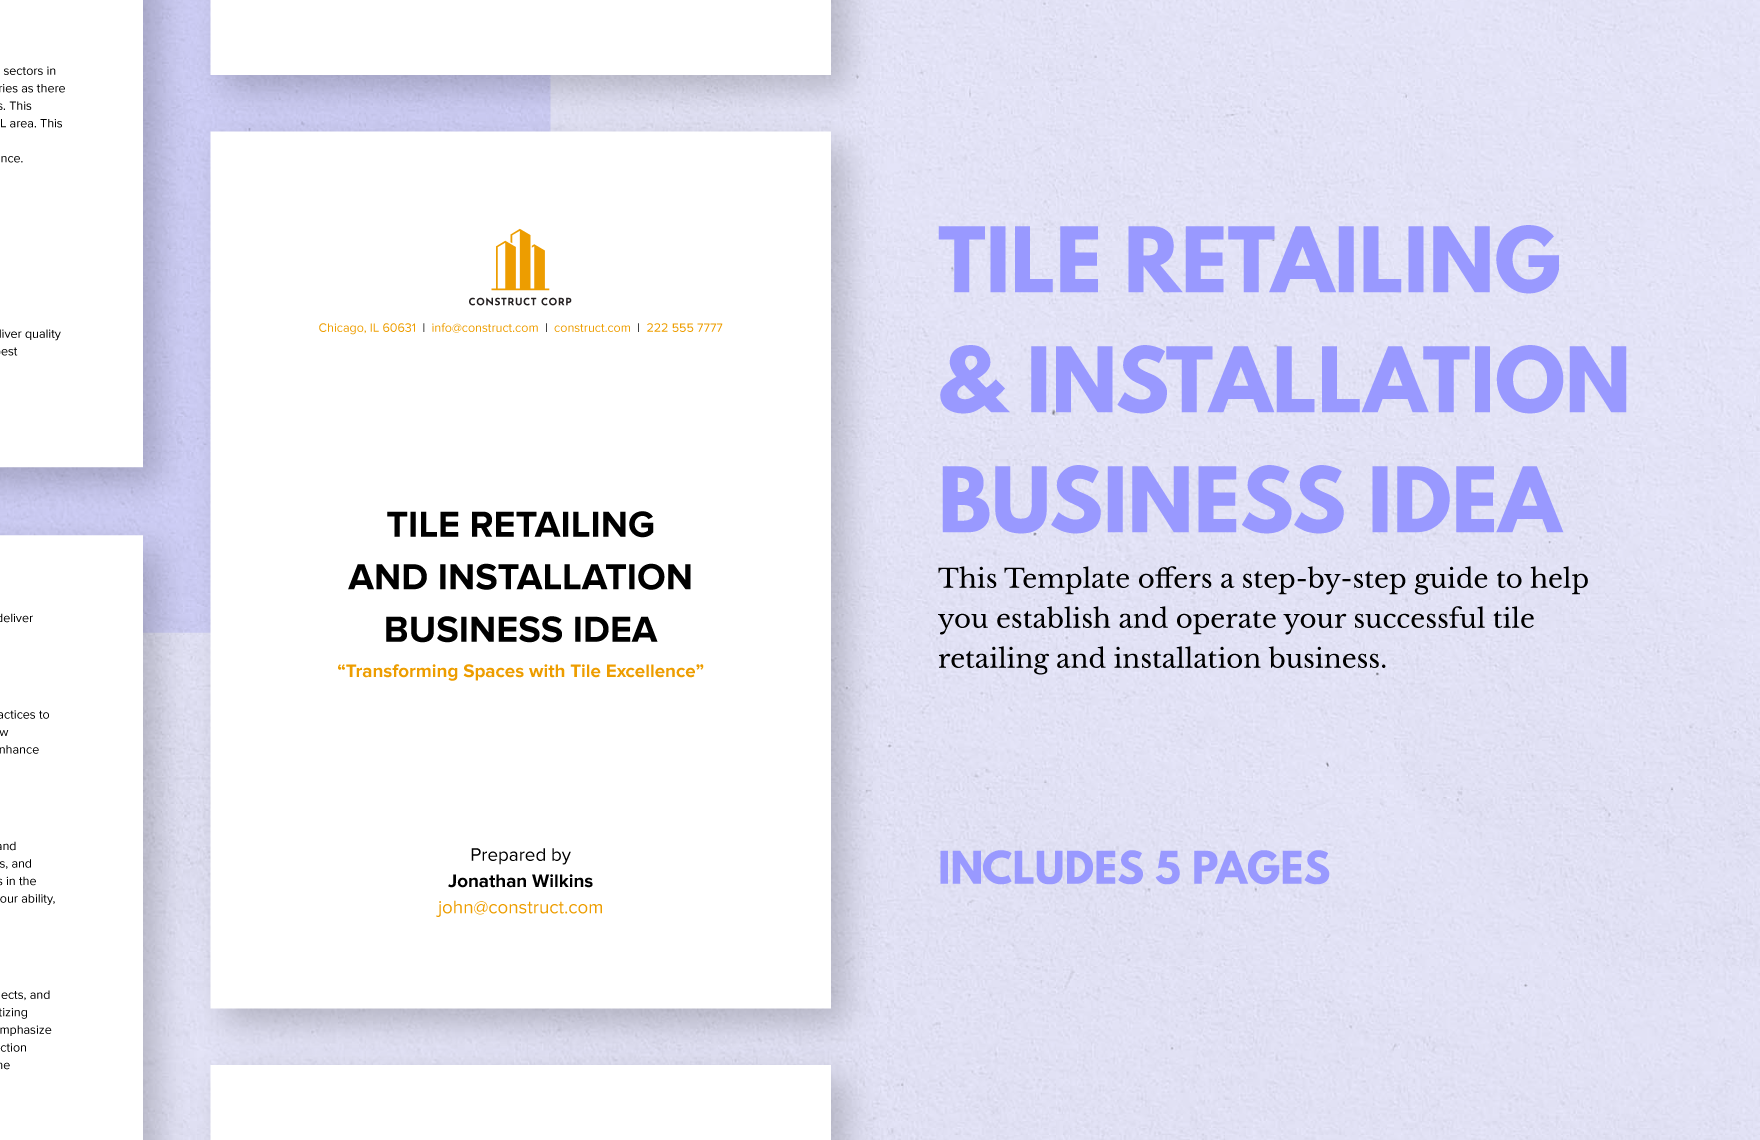 tile-retailing-and-installation-business-idea